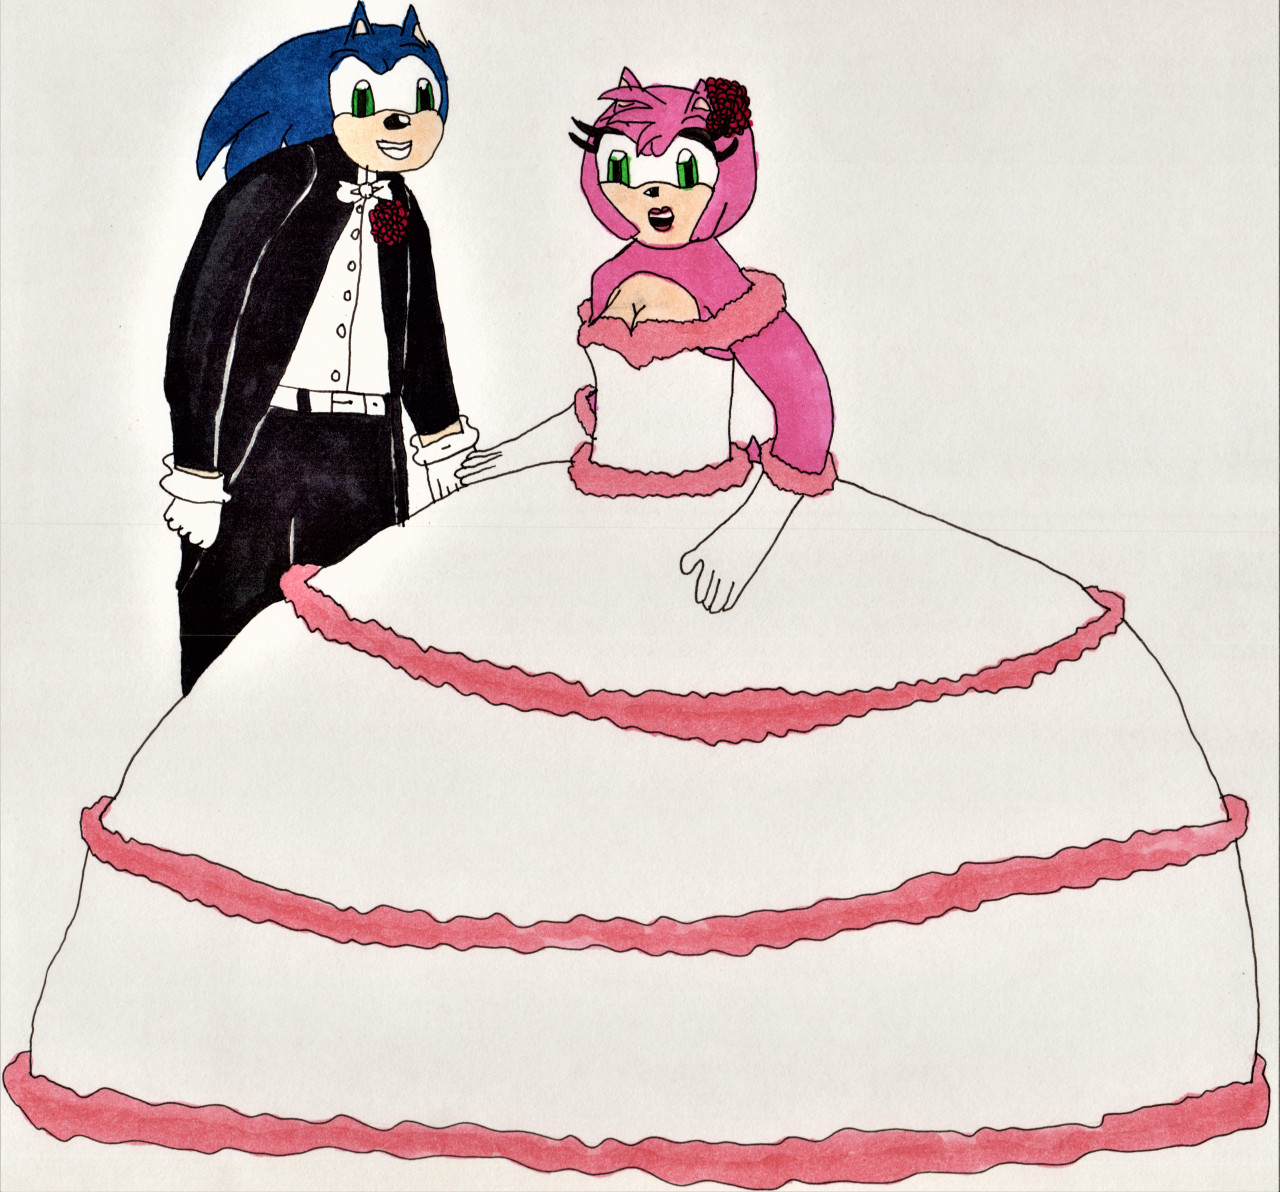 The wedding of sonic and amy - SONAMY ANIMATION 